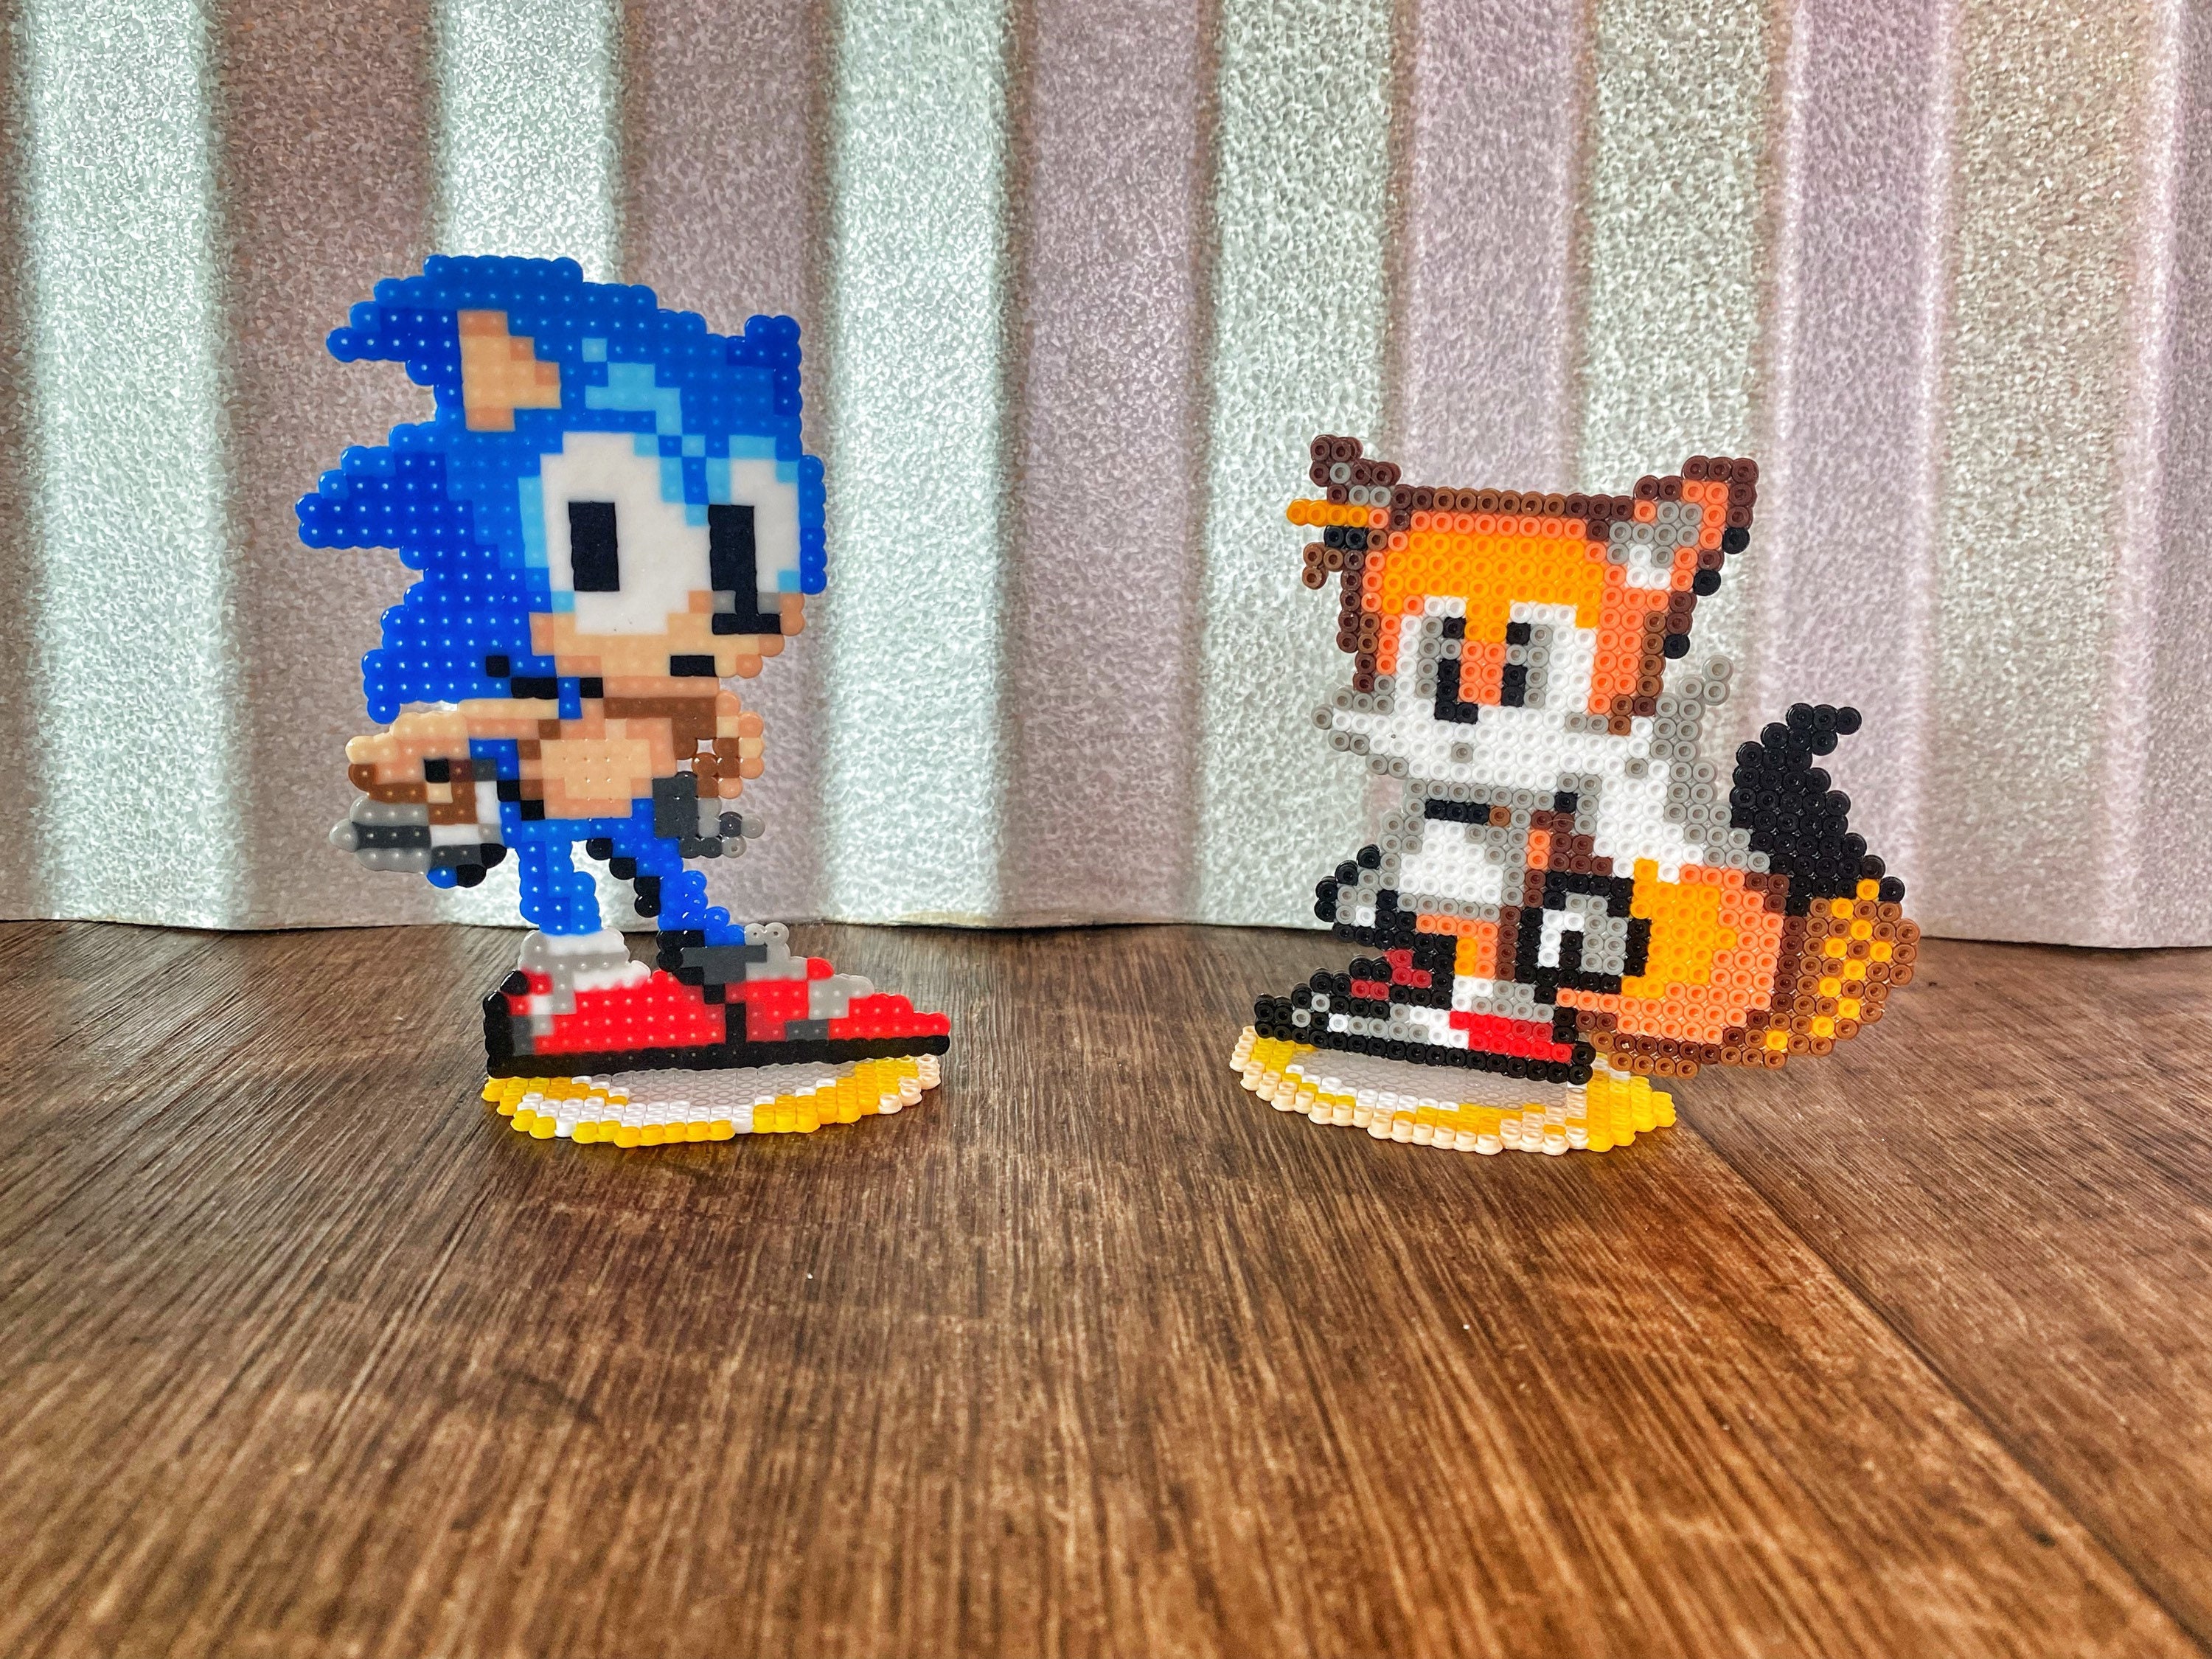 Painting Wall Decoration Sonic Sprite From the Video Game -  Israel